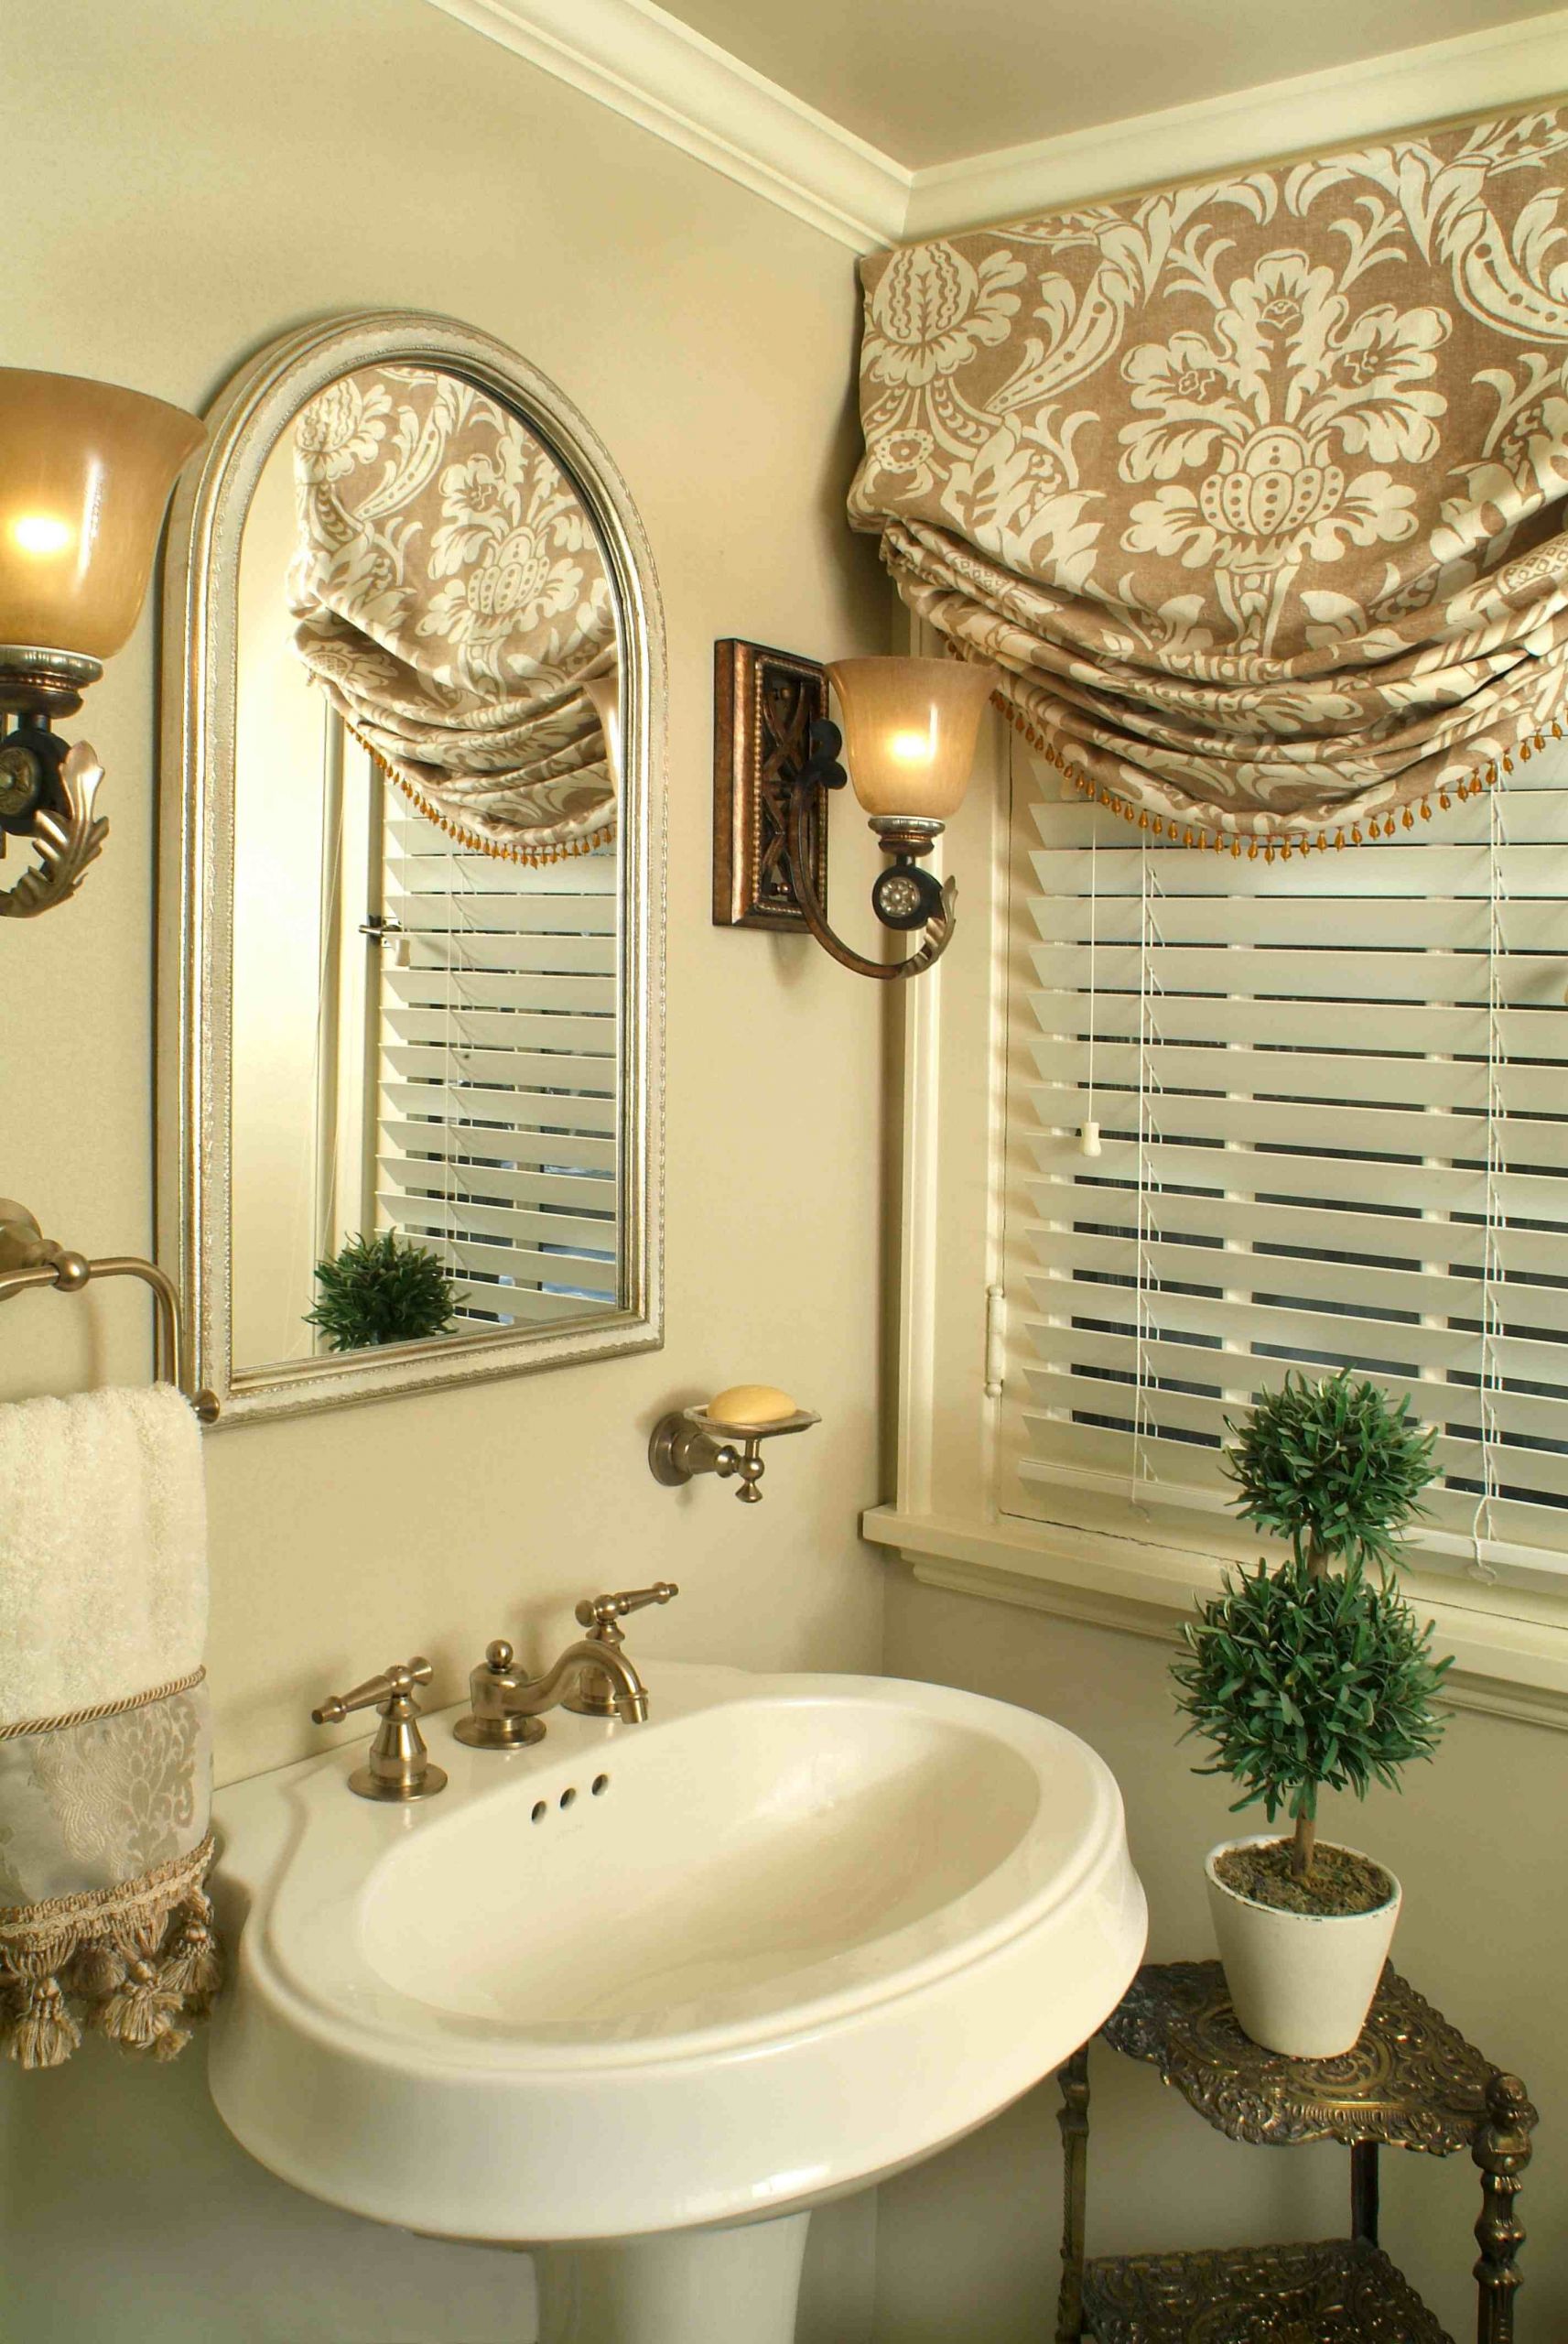 Small Window Curtains For Bathroom
 33 DIY Roman Shade Ideas To Inspire Your Decorating